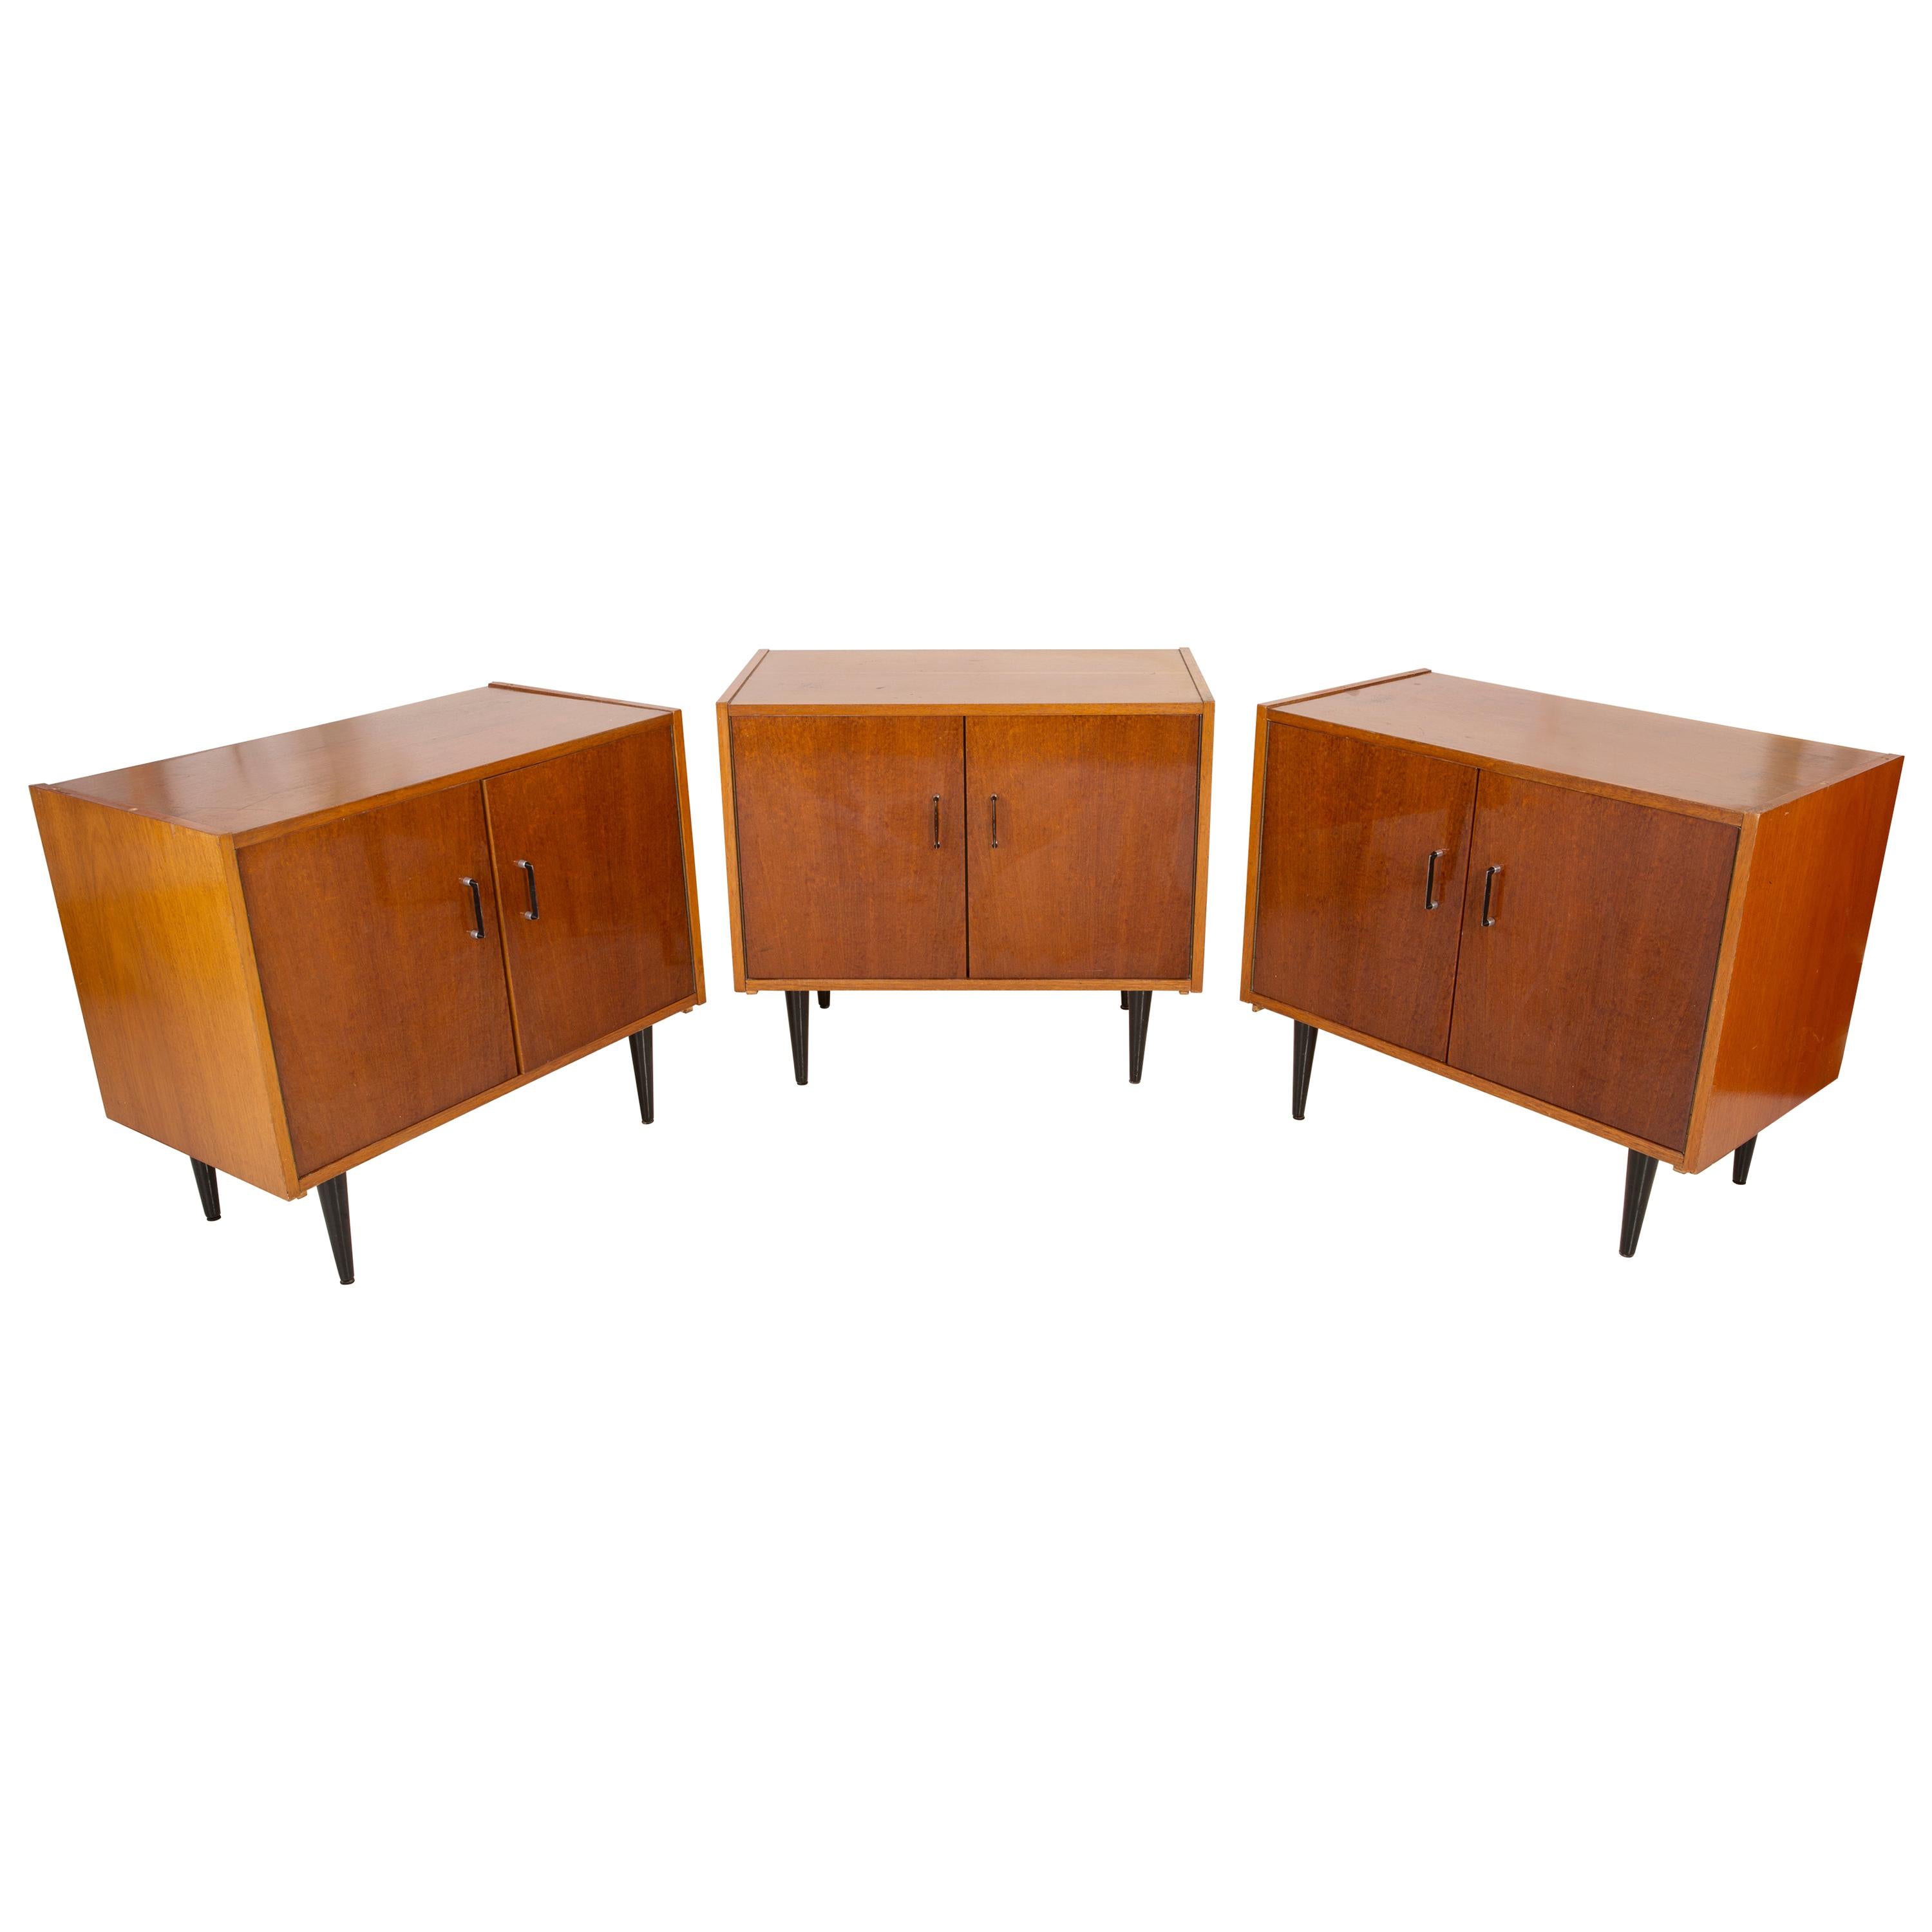 Set of Three Mid-Century Modern Vintage Sideboards, Wood, Poland, 1960s For Sale